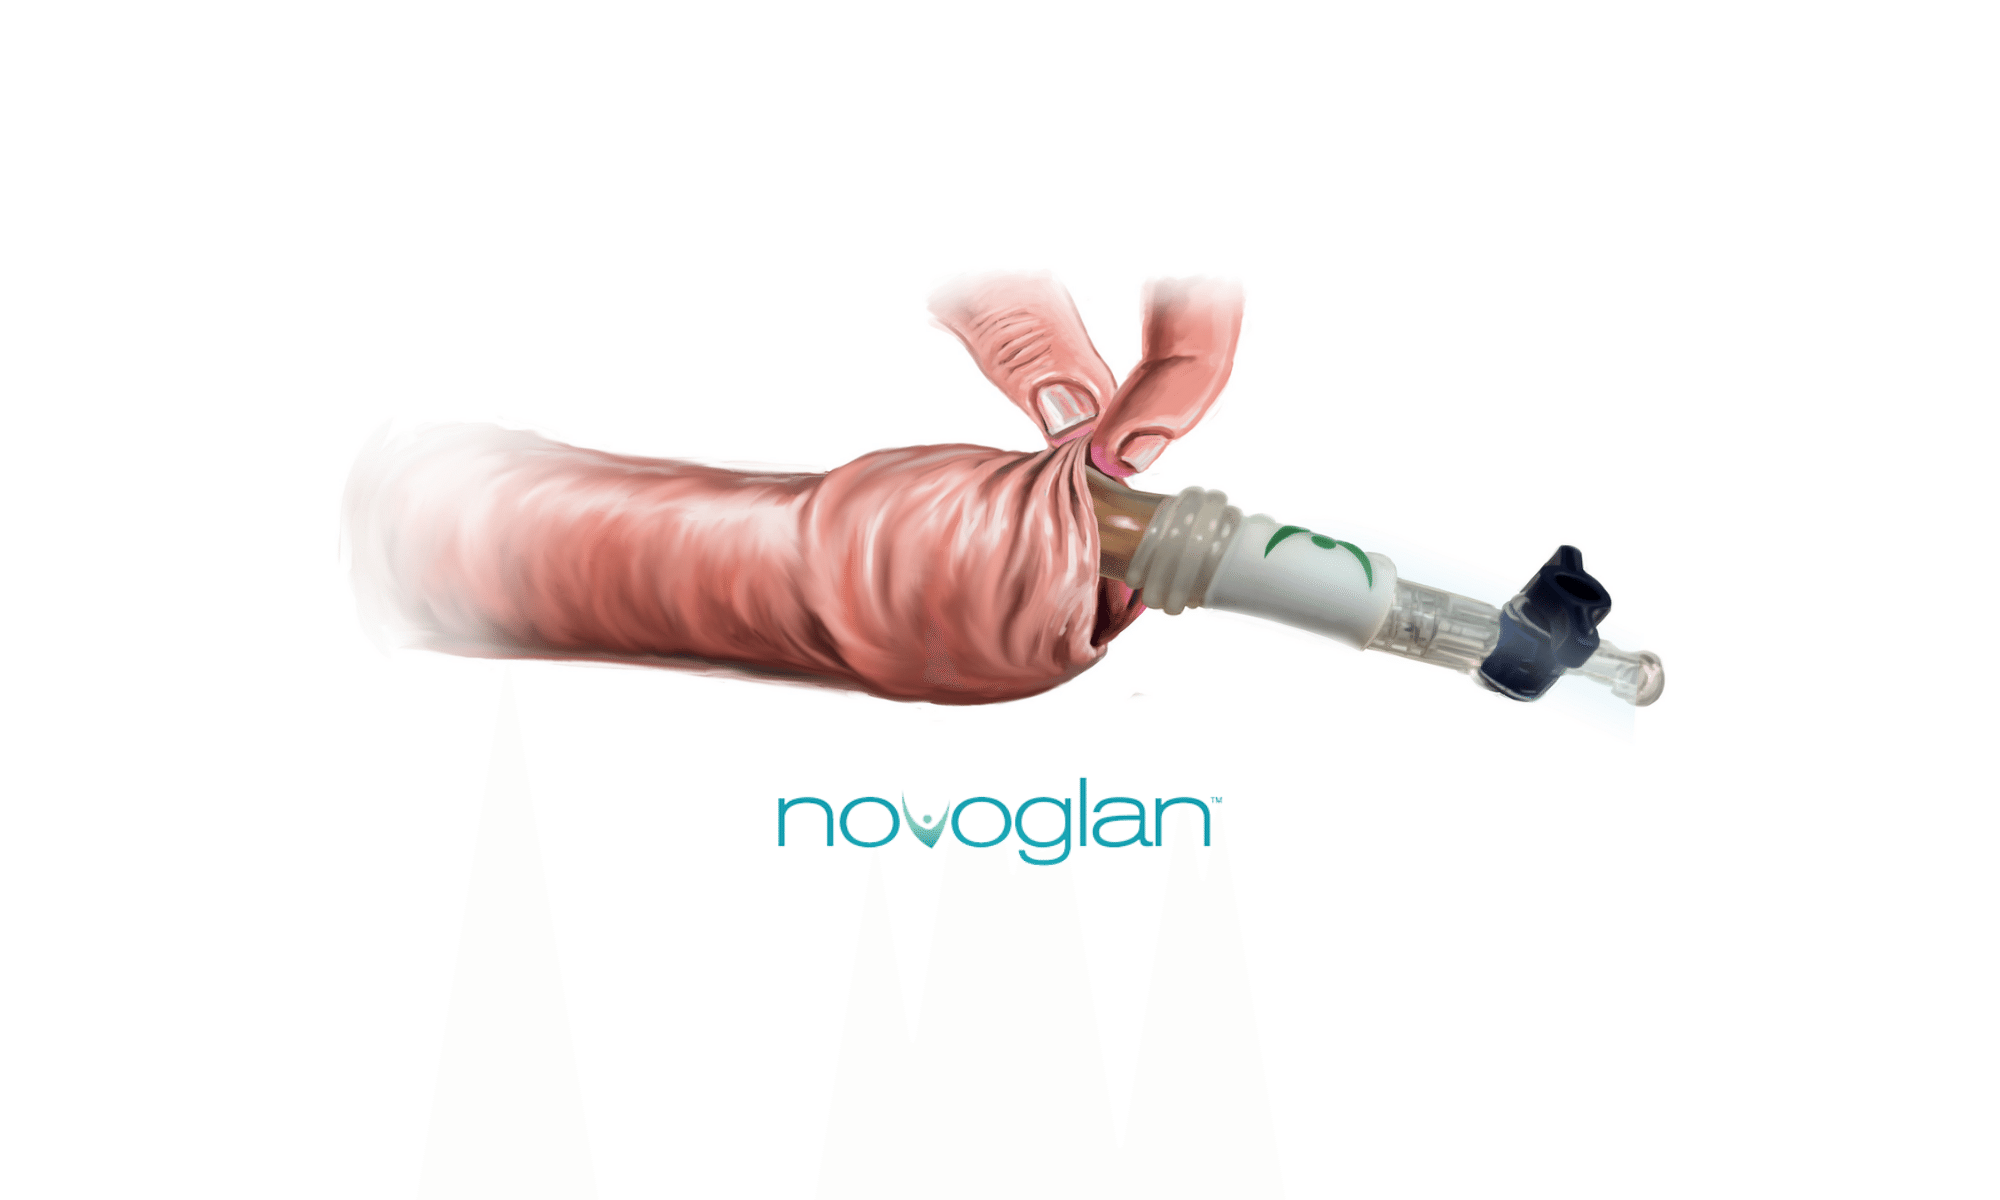 Novoglan - the gold standard in phimosis treatment! - Suffering from  phimosis or tight foreskin discomfort?